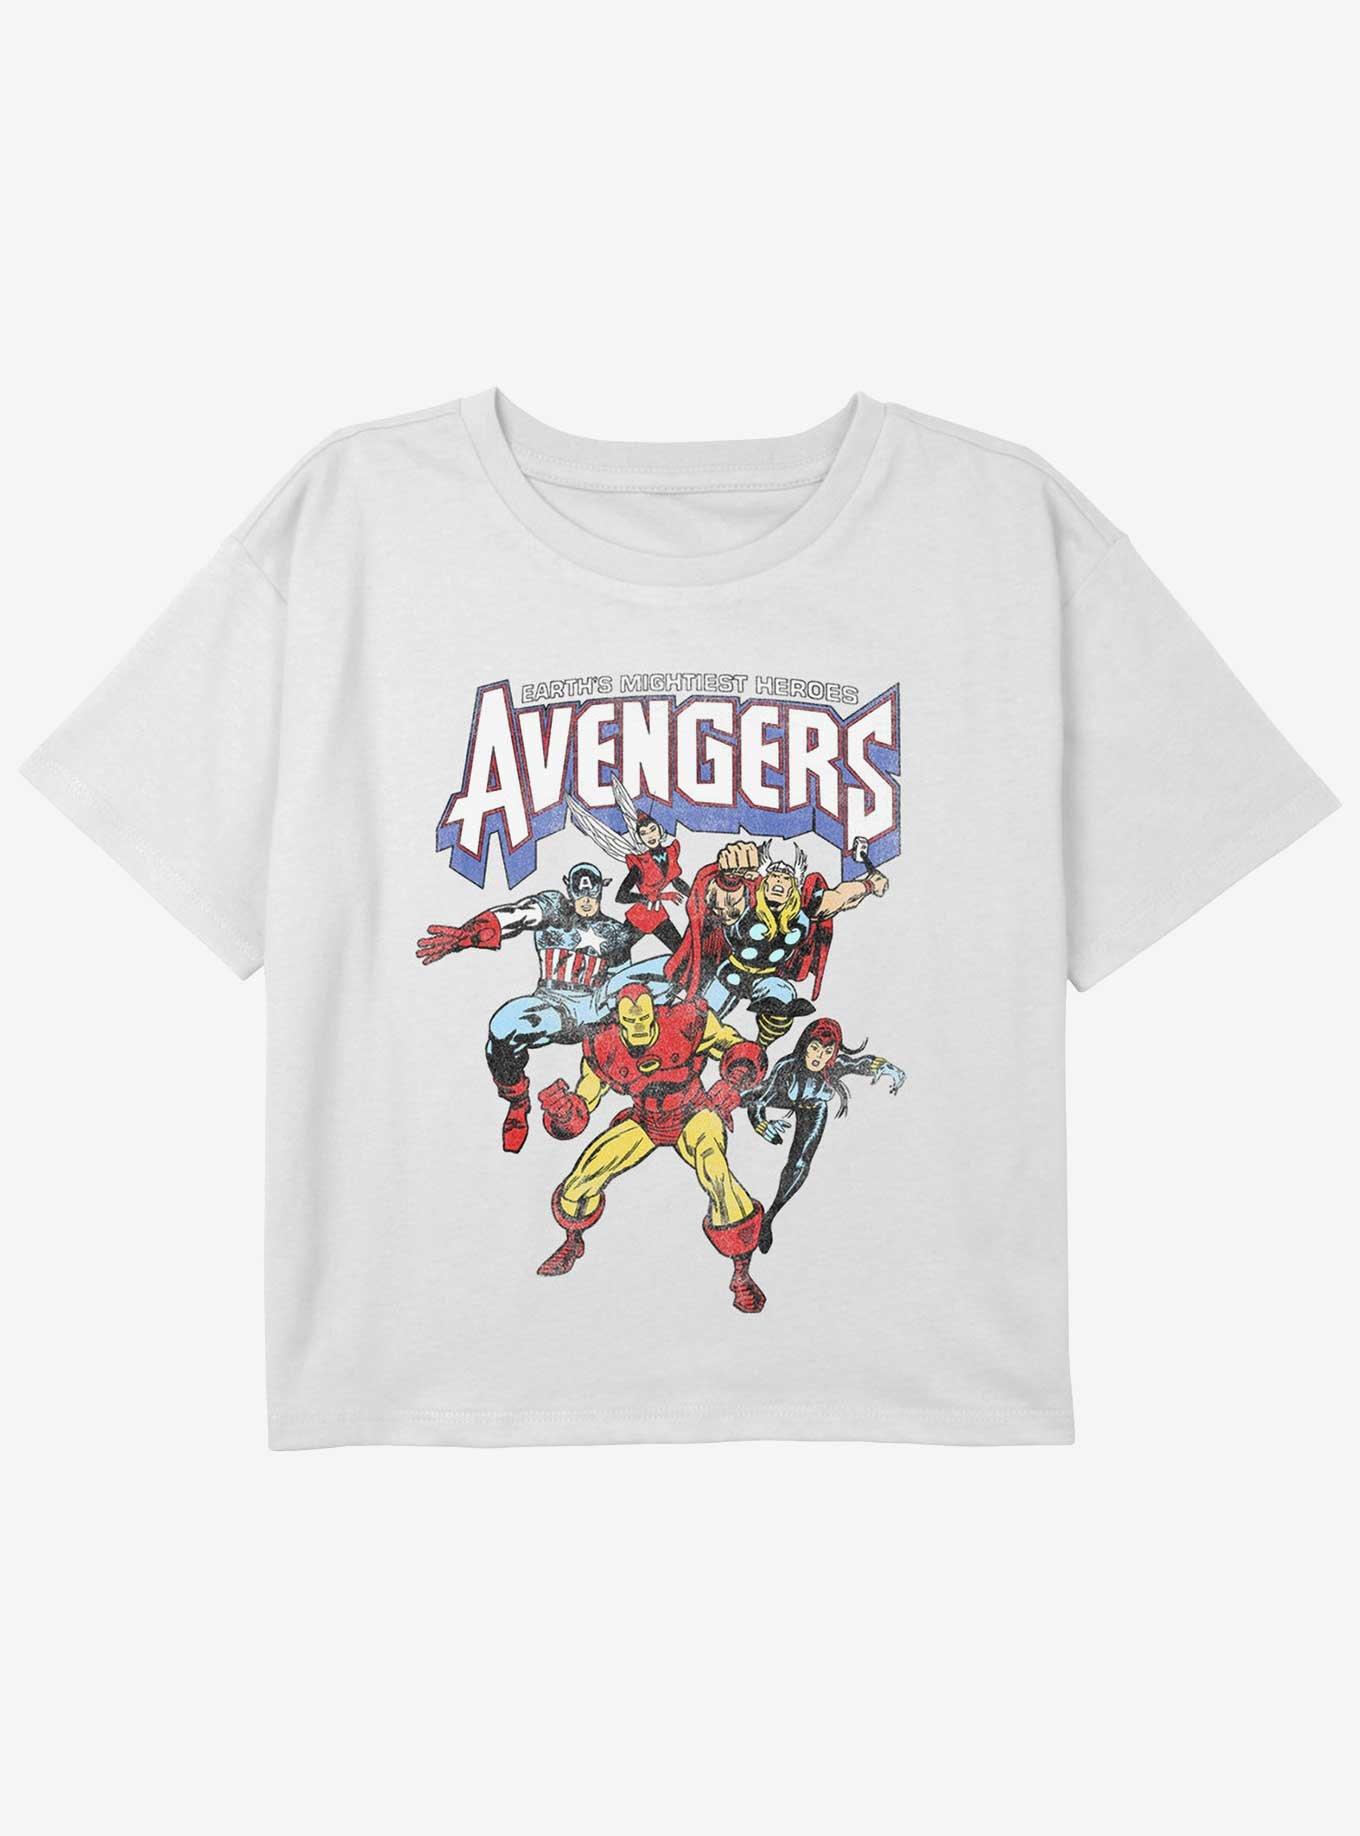 Marvel Avengers Heroes Girls Youth Crop T-Shirt, WHITE, hi-res